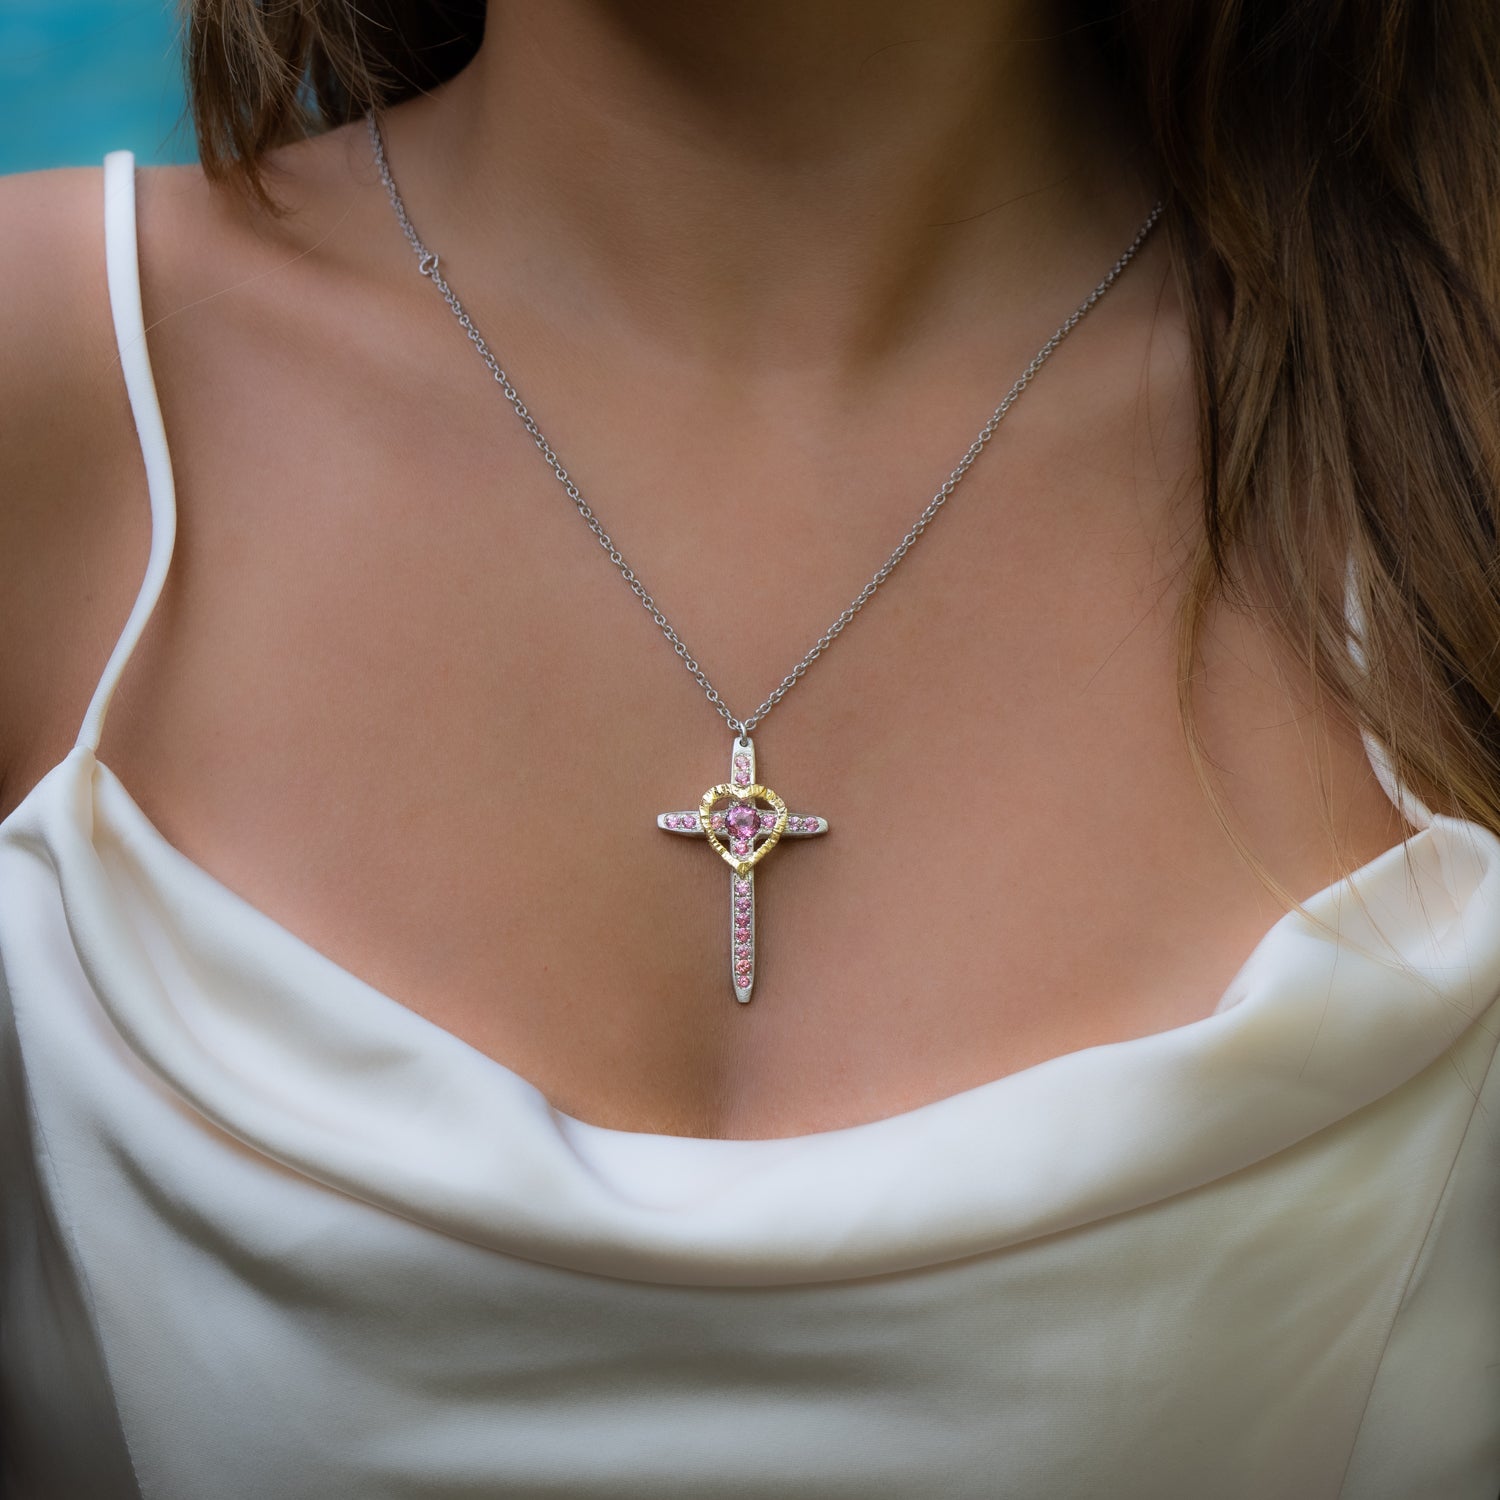 Taru Jewelry Cross and Heart Necklace crafted from 18K gold and silver is a unique blend of traditional and modern design. The cross, a timeless symbol of faith and devotion, is adorned with beautiful pink topaz, adding a touch of color and elegance to the piece.